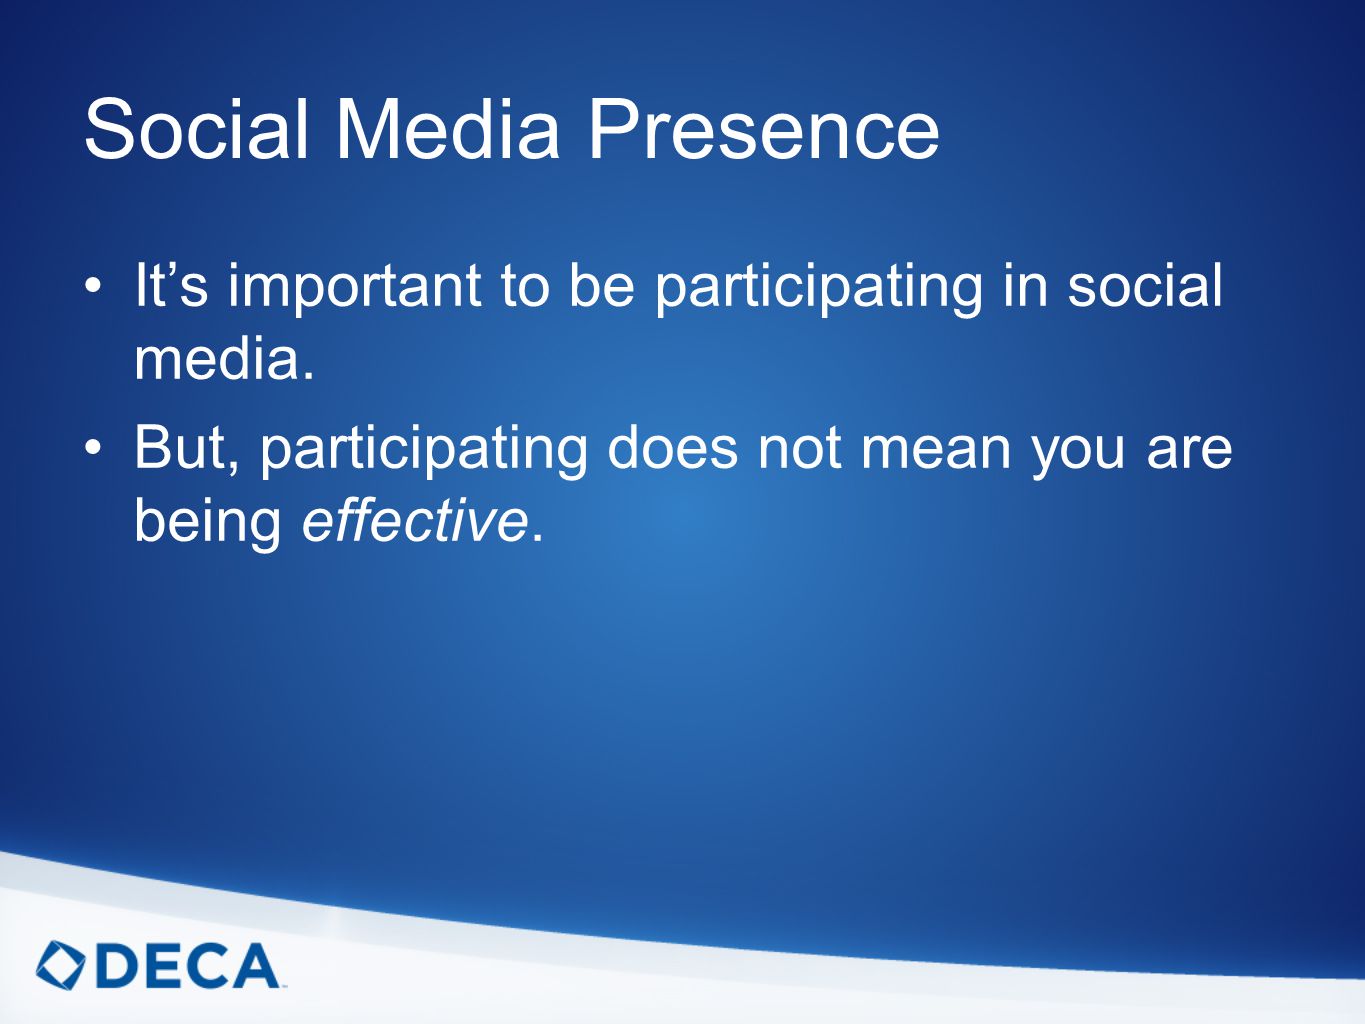 Social Media Presence It’s important to be participating in social media.